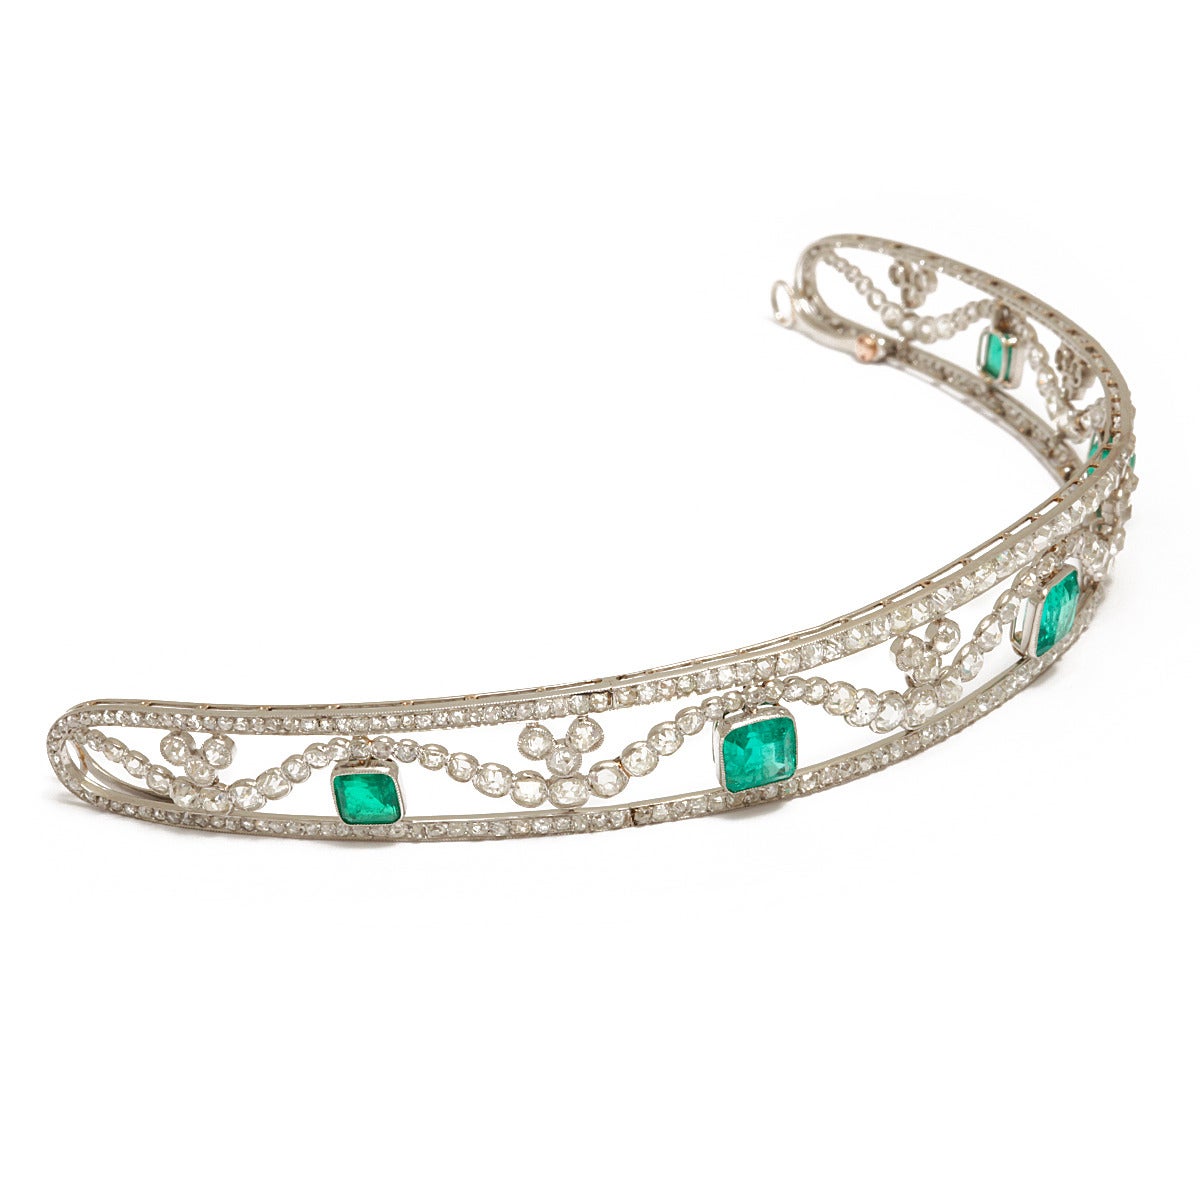 Edwardian emerald and diamond tiara/diadem delicately set in openwork platinum, made by famed jeweler Joseph Chaumet, who specialized in tiaras.

Paris, ca. 1910.
(Approx. 25 cts. of diamonds; 16 cts. of emeralds)